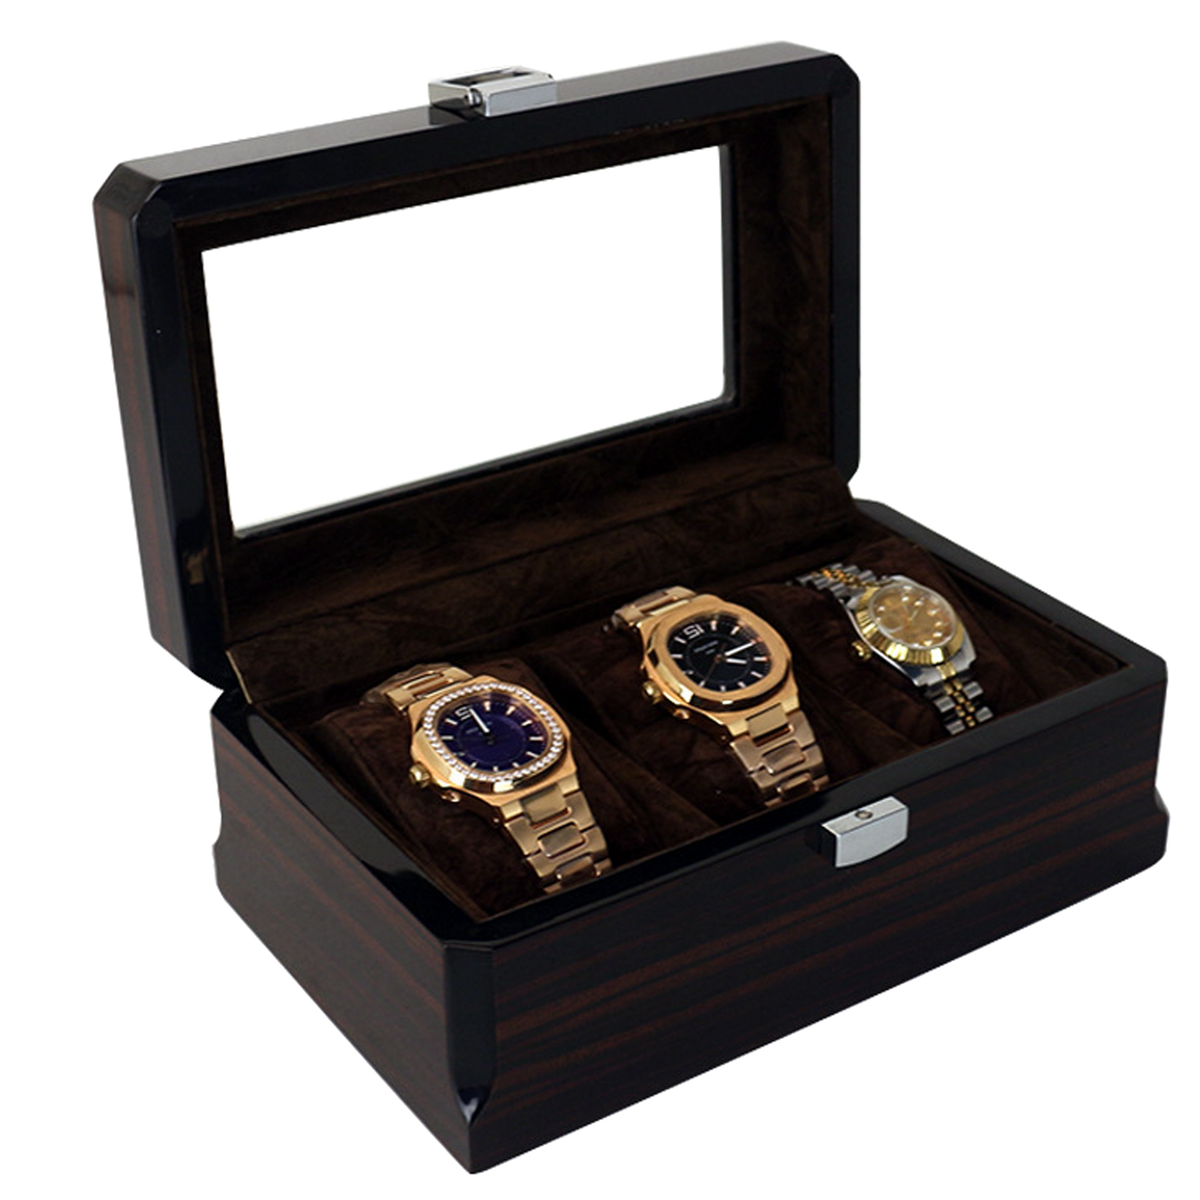 STRAPSCO - Legacy High Gloss Watch Box for 3 Watches